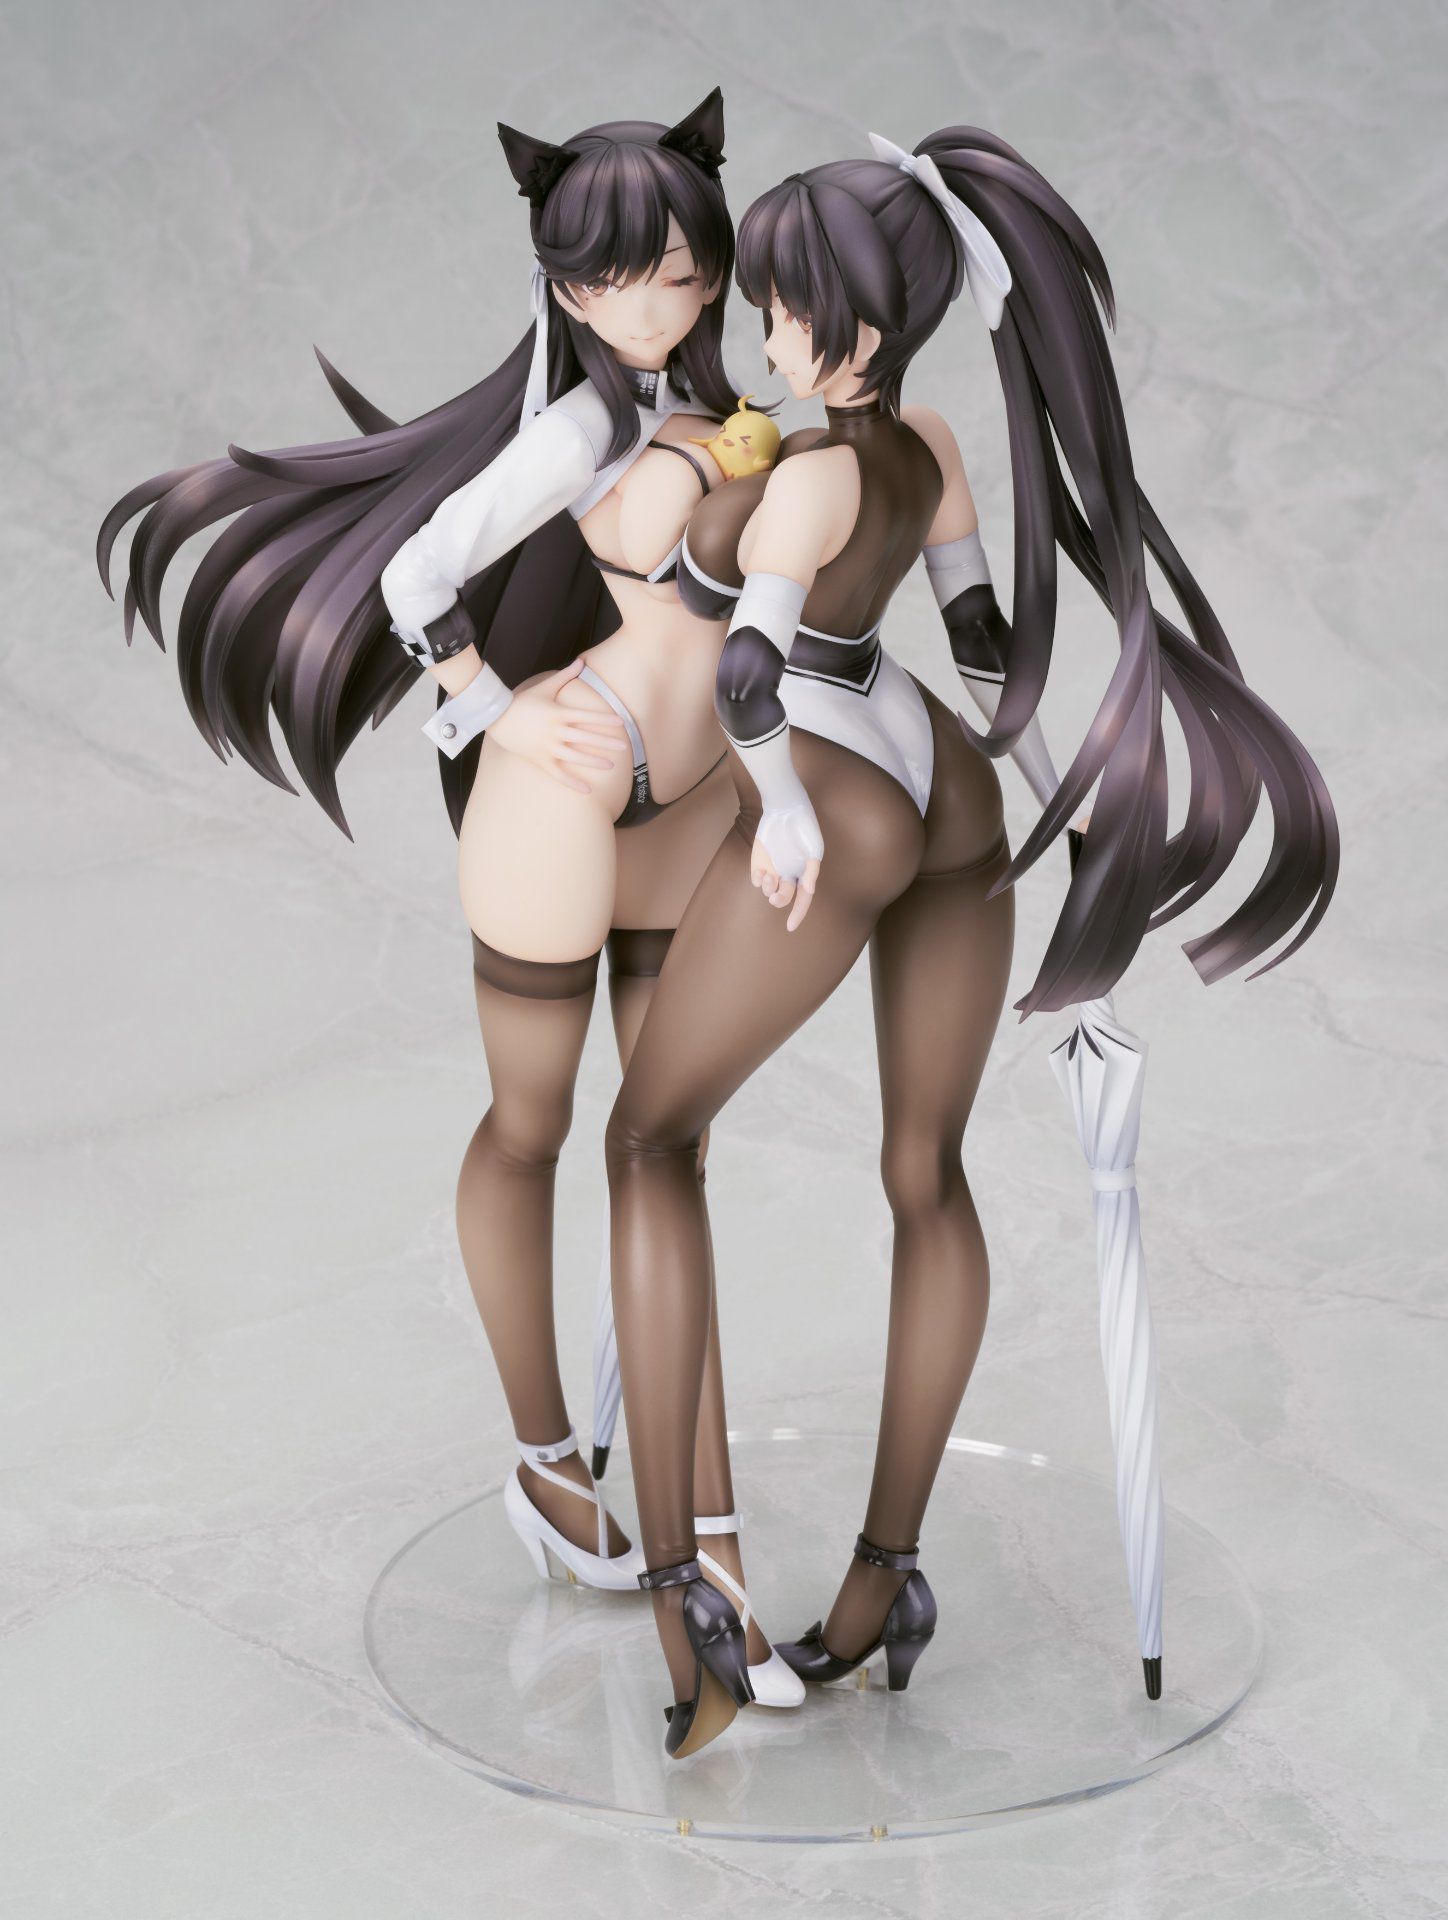 【Image】Recent beautiful girl figures, the modeling is too erotic and exceeds the tragic woman wwwww 2